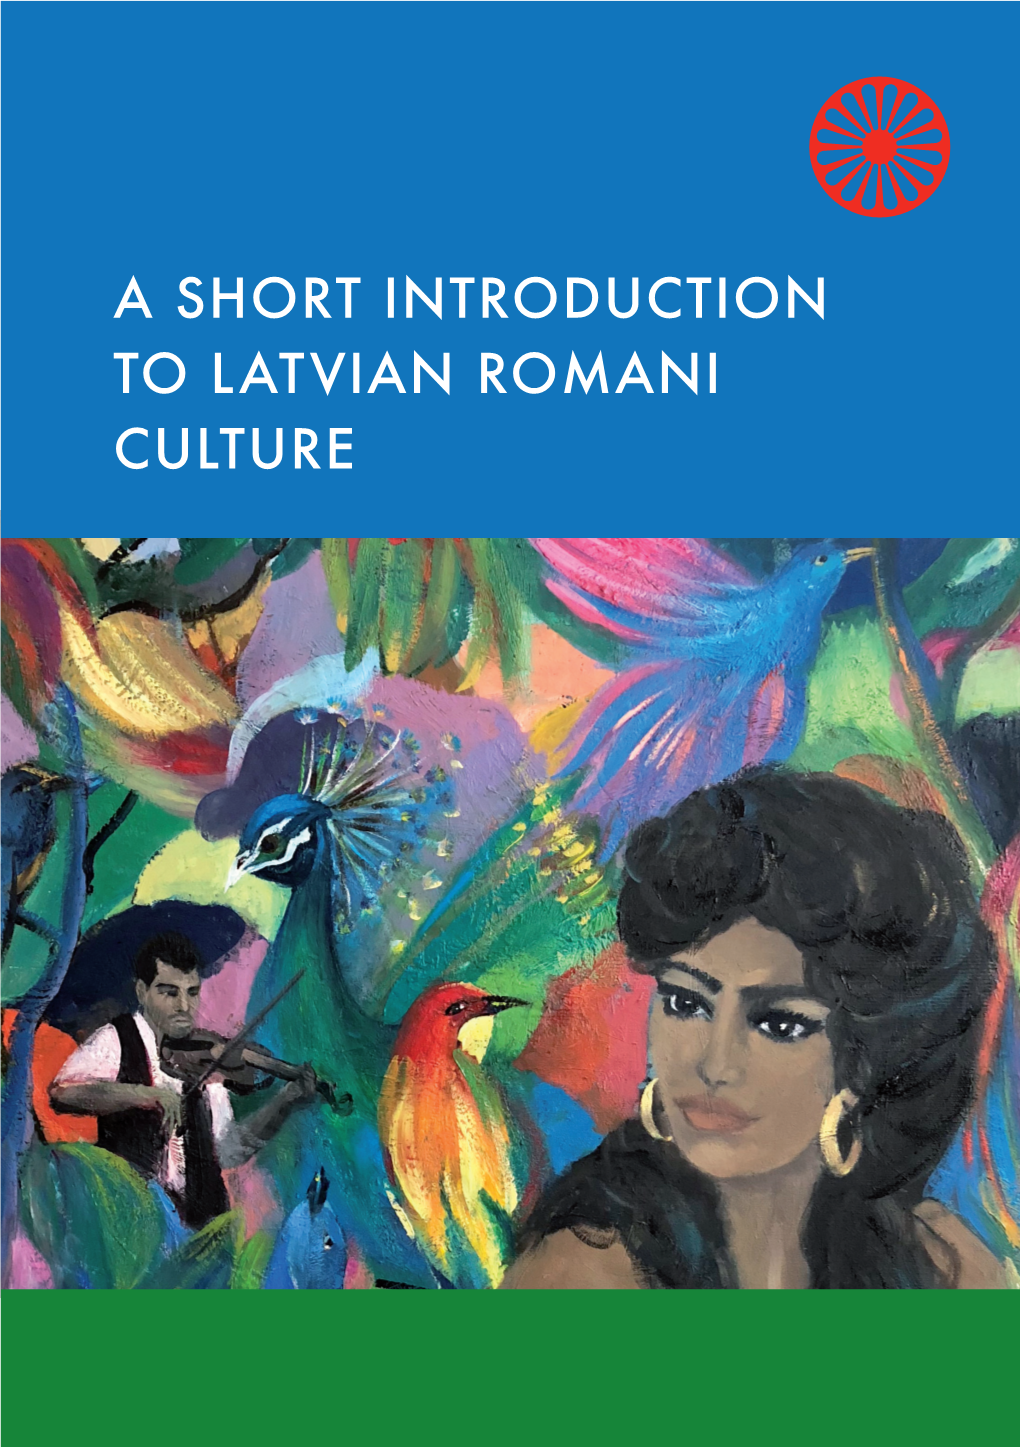 A Short Introduction to Latvian Romani Culture